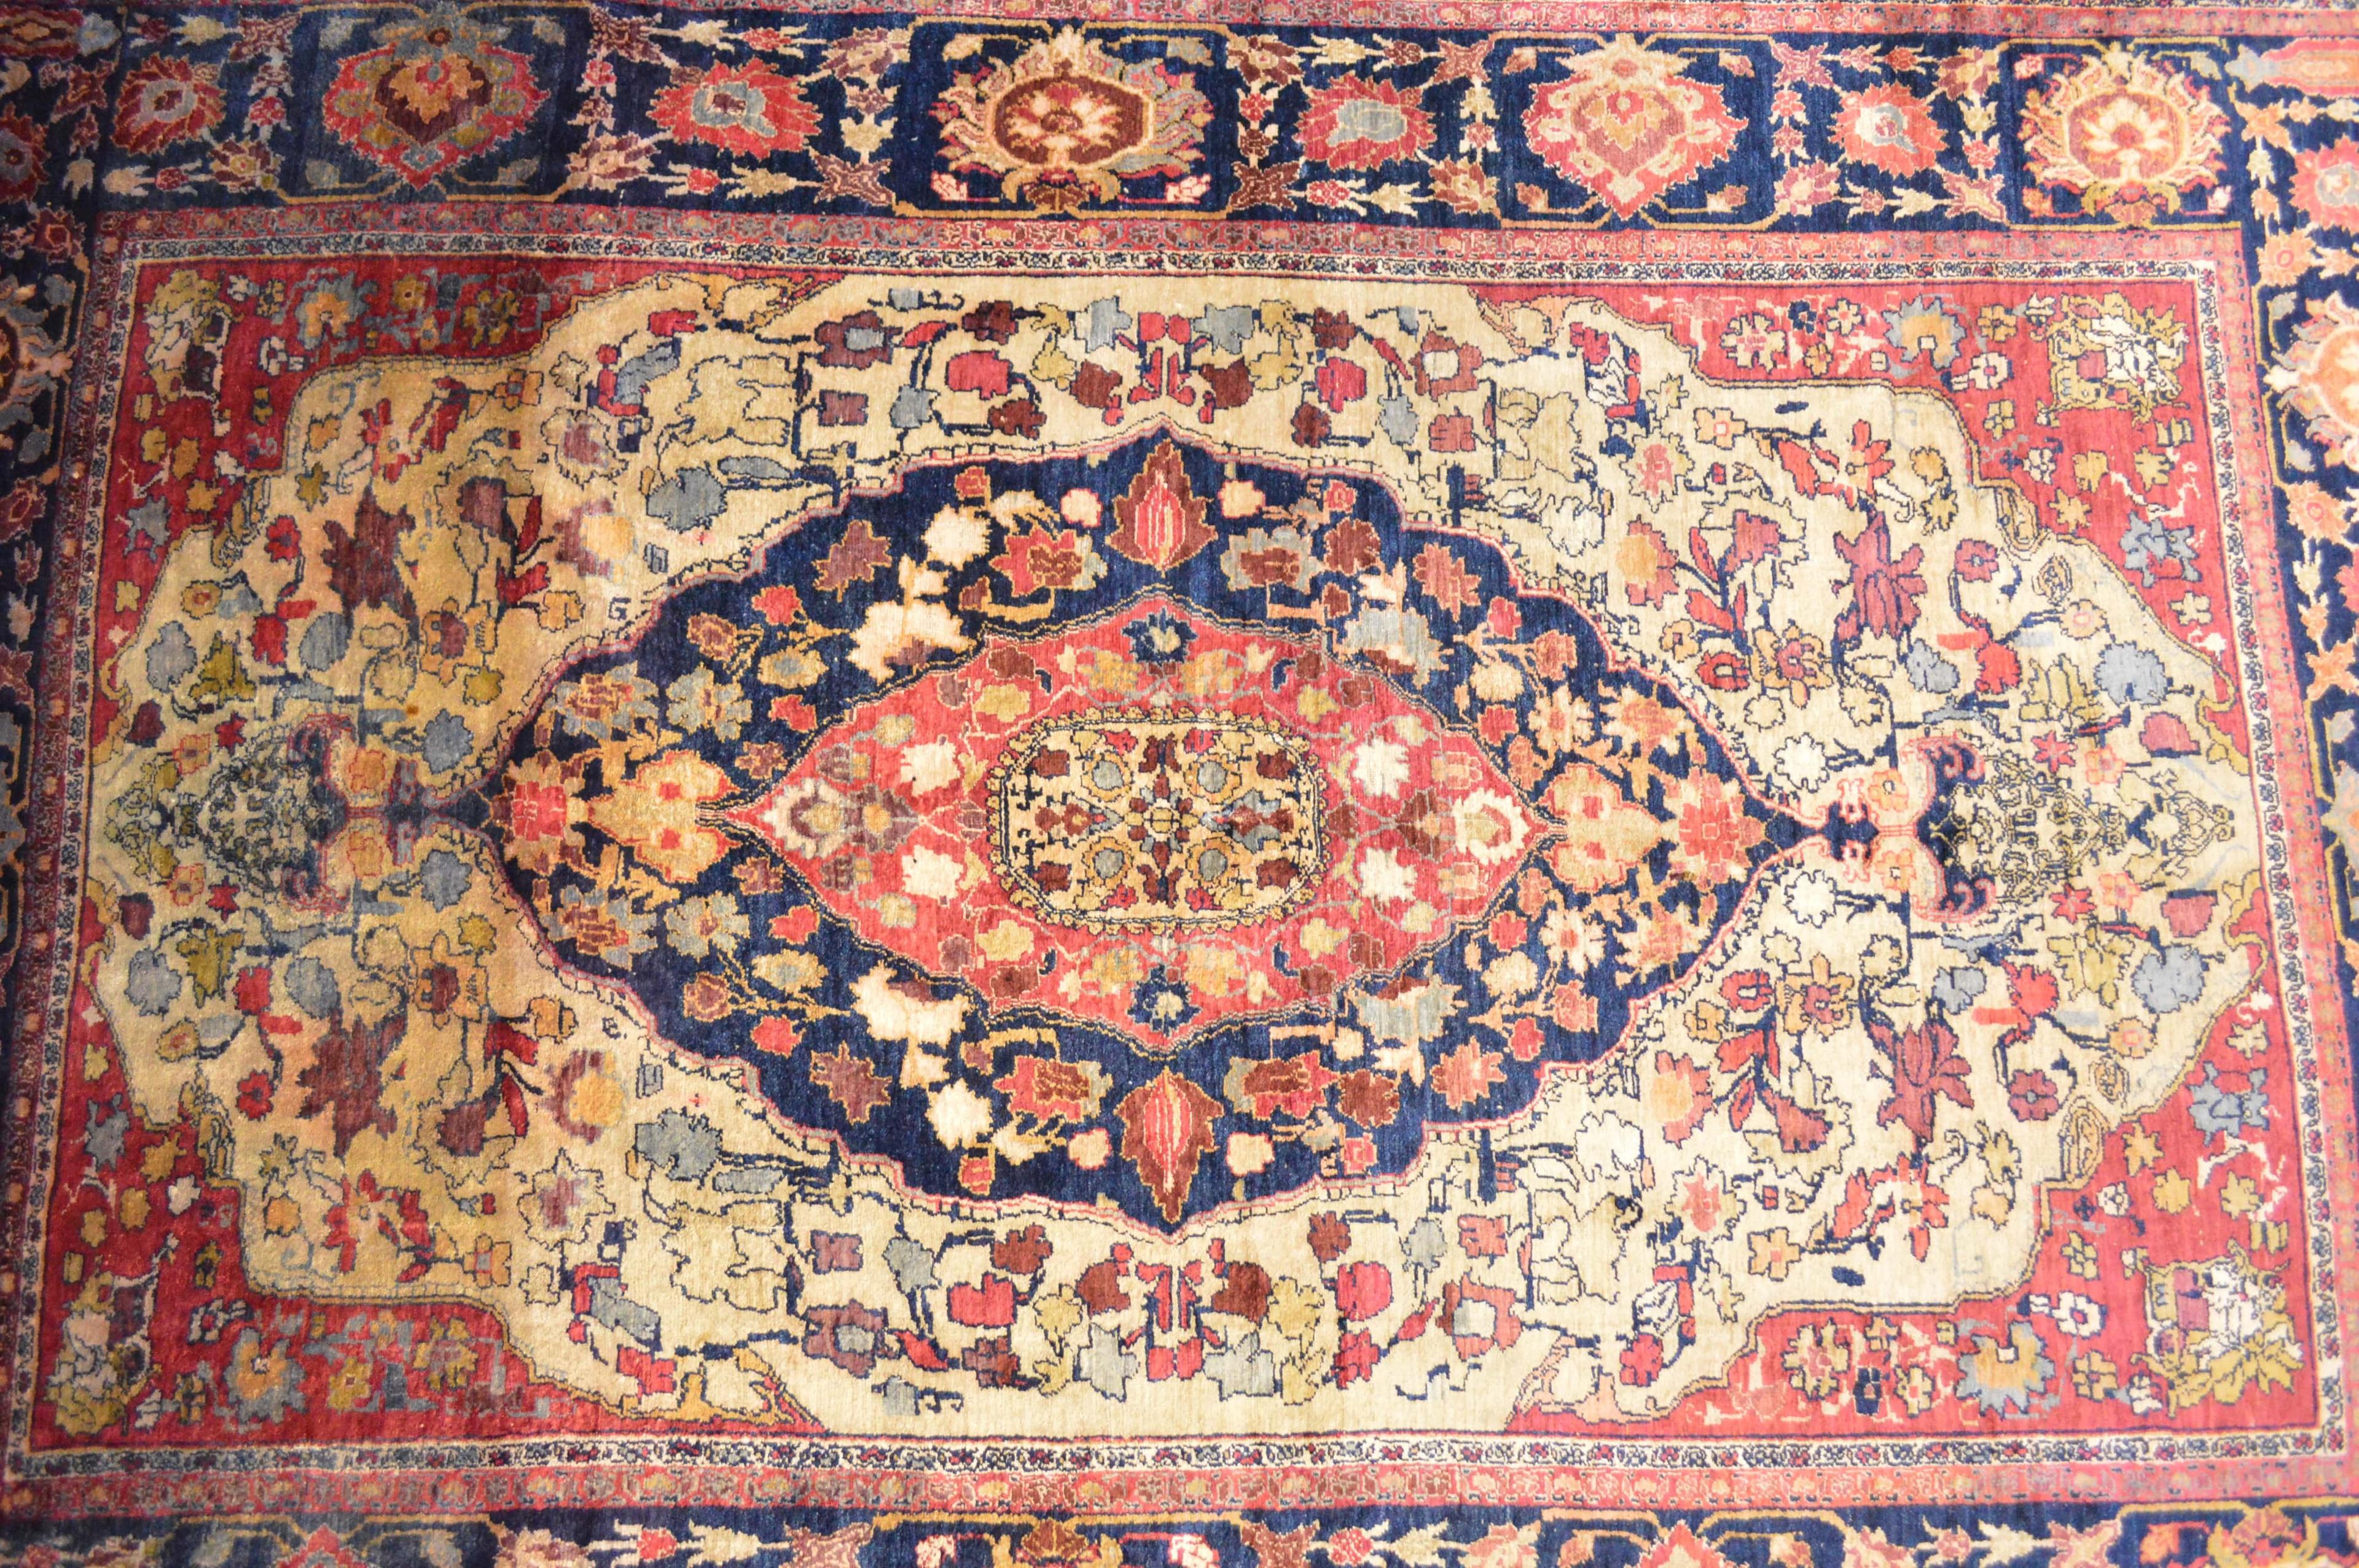 1880's Antique Handmade Silk Rug, 4'4" X 6'5", See Photos For Detail And Condition